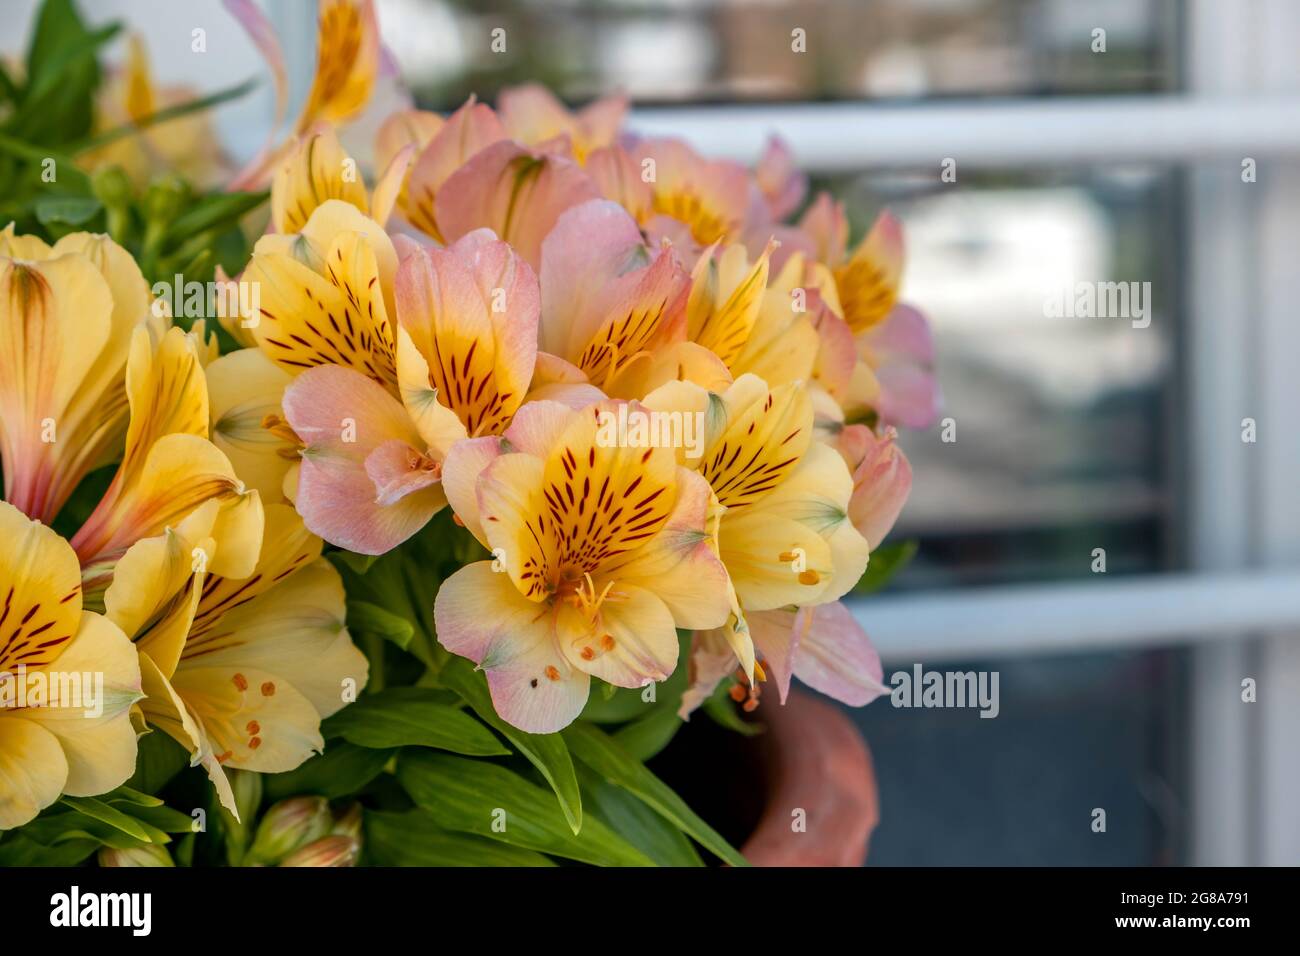 Orange fresh flowers with spots green leaves flora.  Alstroemeria Peruvian or Incas lily plant in pot at blur window with rail. Stock Photo